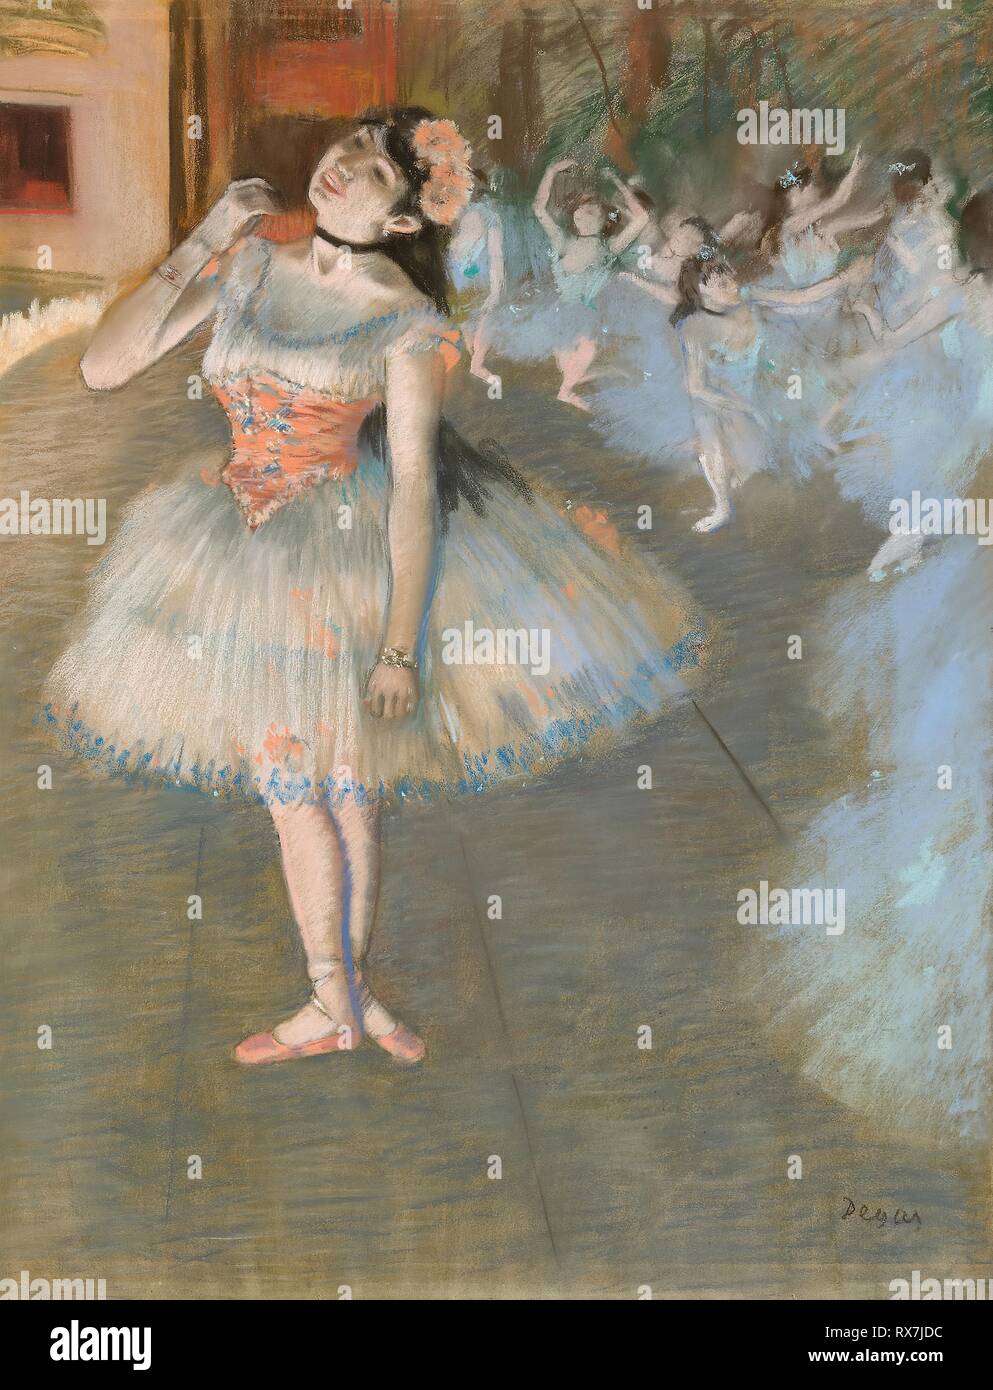 The Star. Edgar Degas; French, 1834-1917. Date: 1879-1881. Dimensions: 733 × 574 mm. Pastel on cream wove paper, edge mounted on board. Origin: France. Museum: The Chicago Art Institute. Author: Hilaire Germain Edgar Degas. Stock Photo